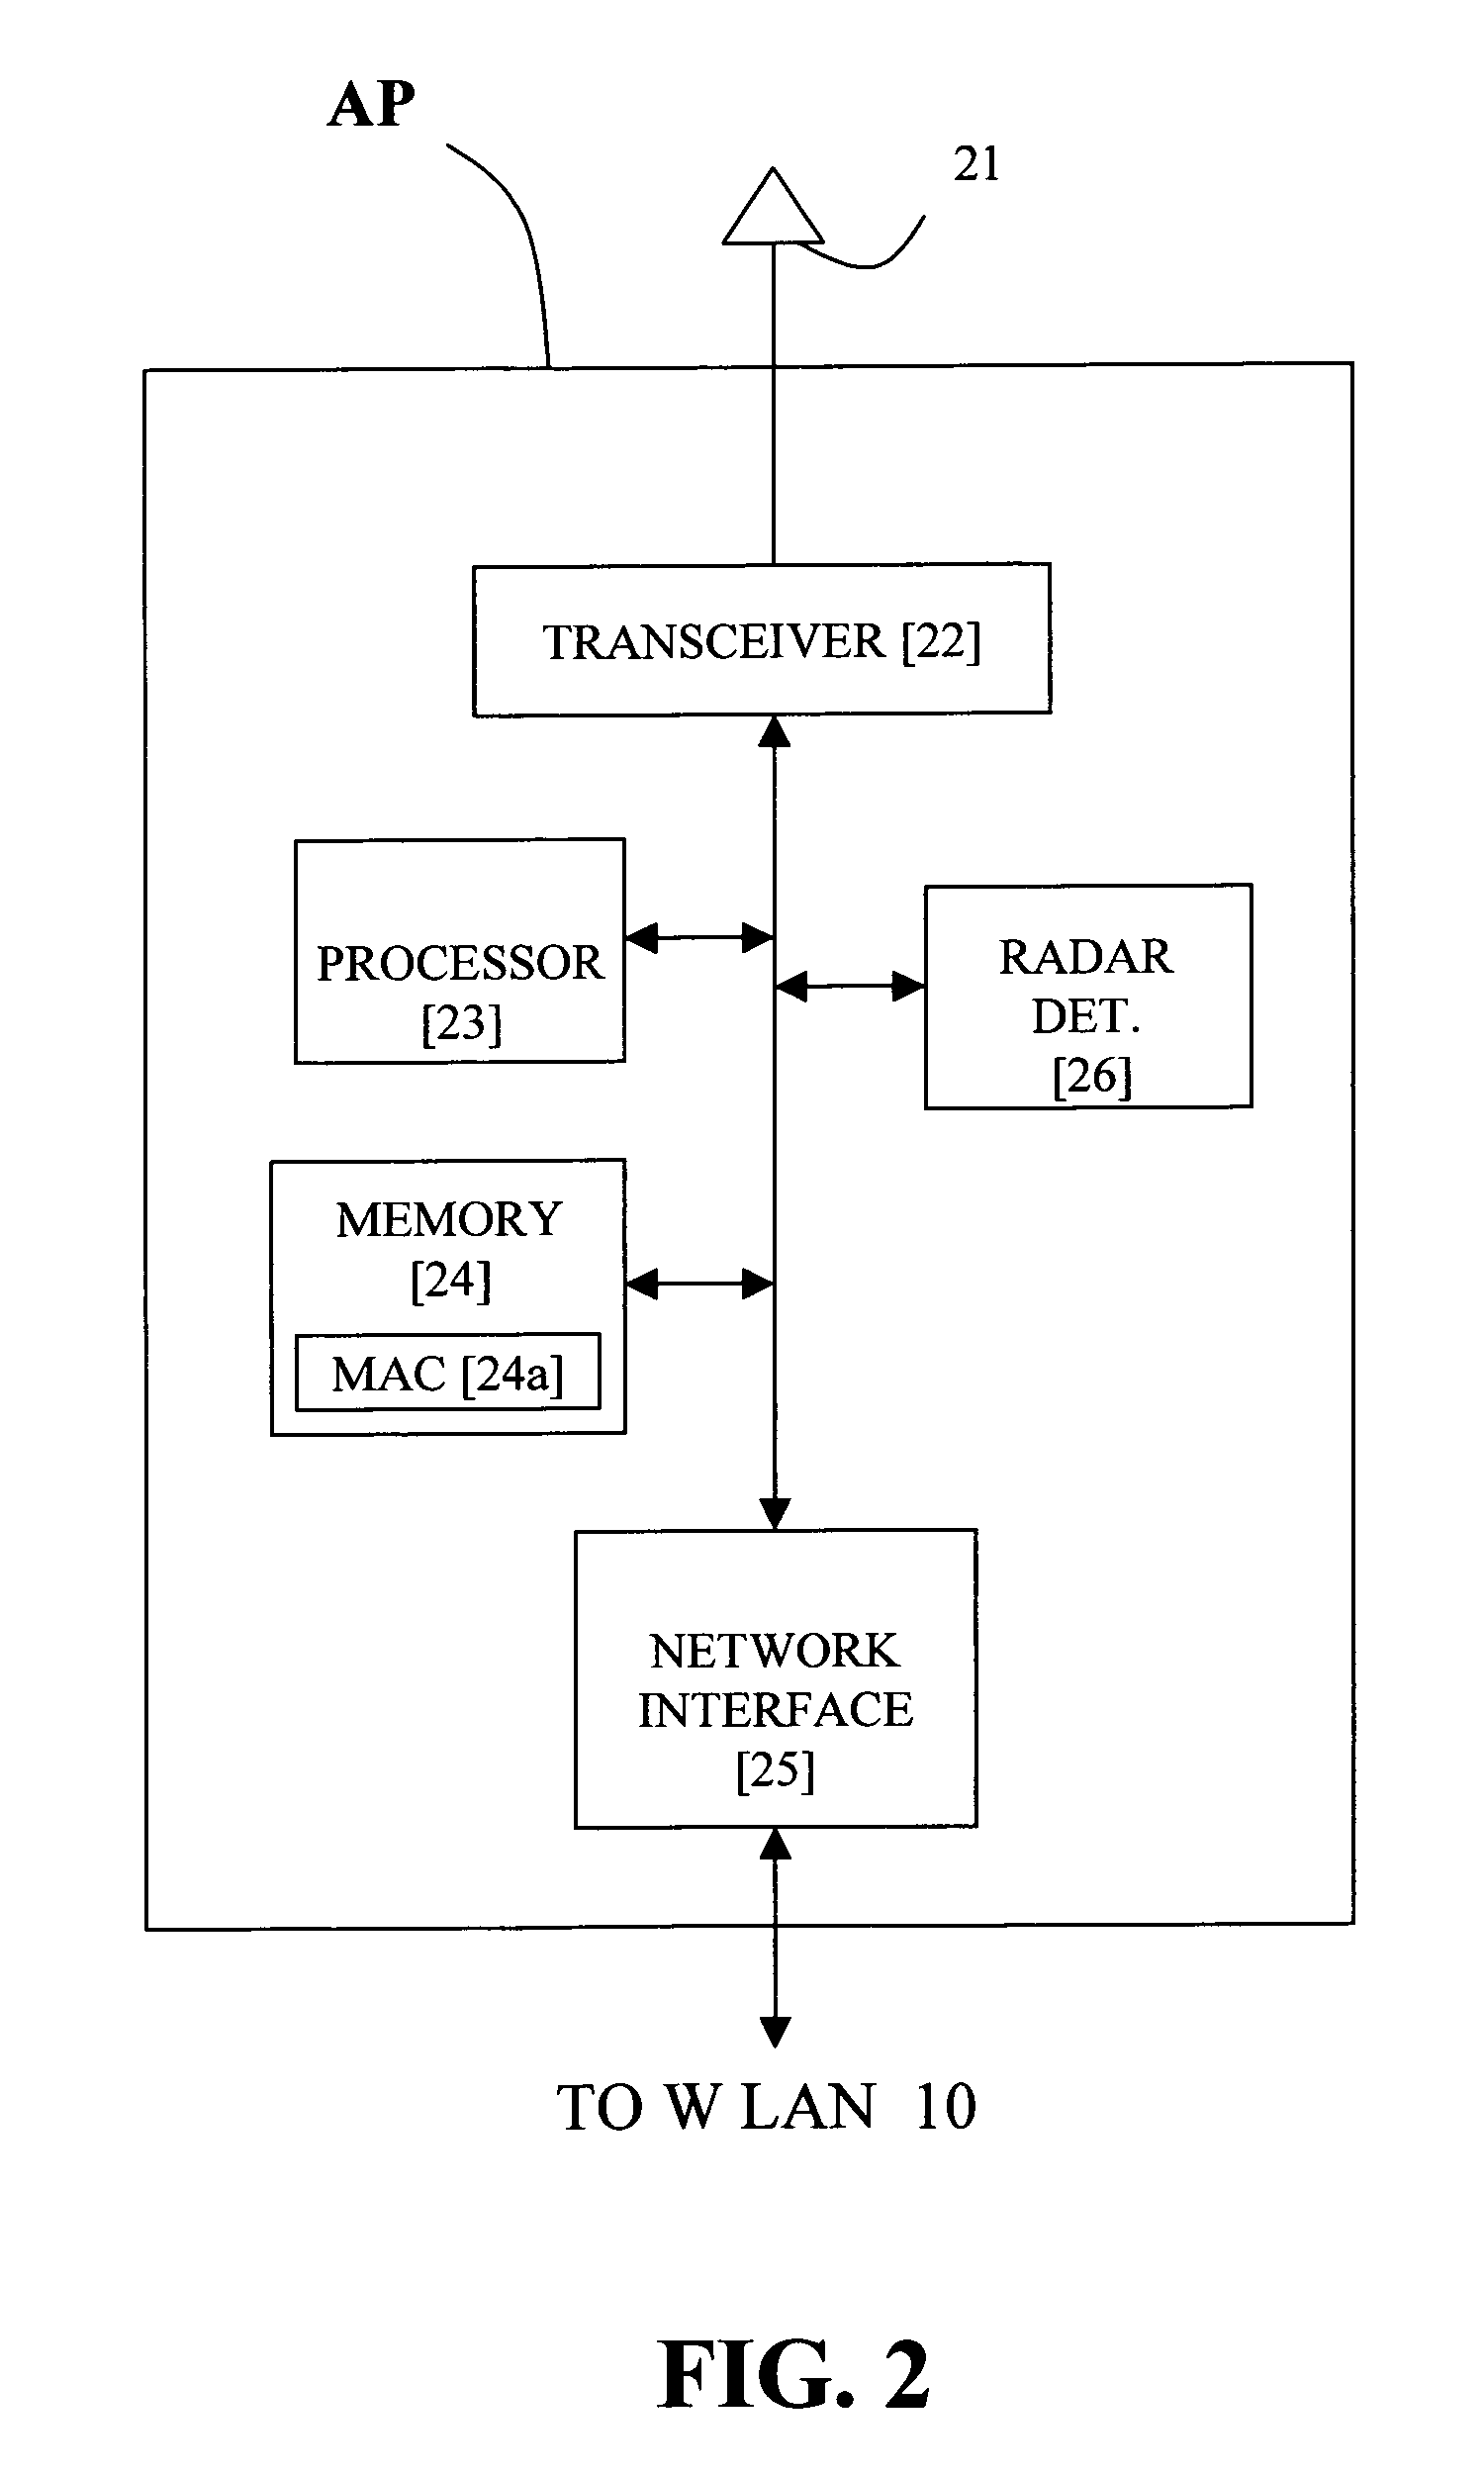 Method for determining DFS channel availability in a wireless LAN